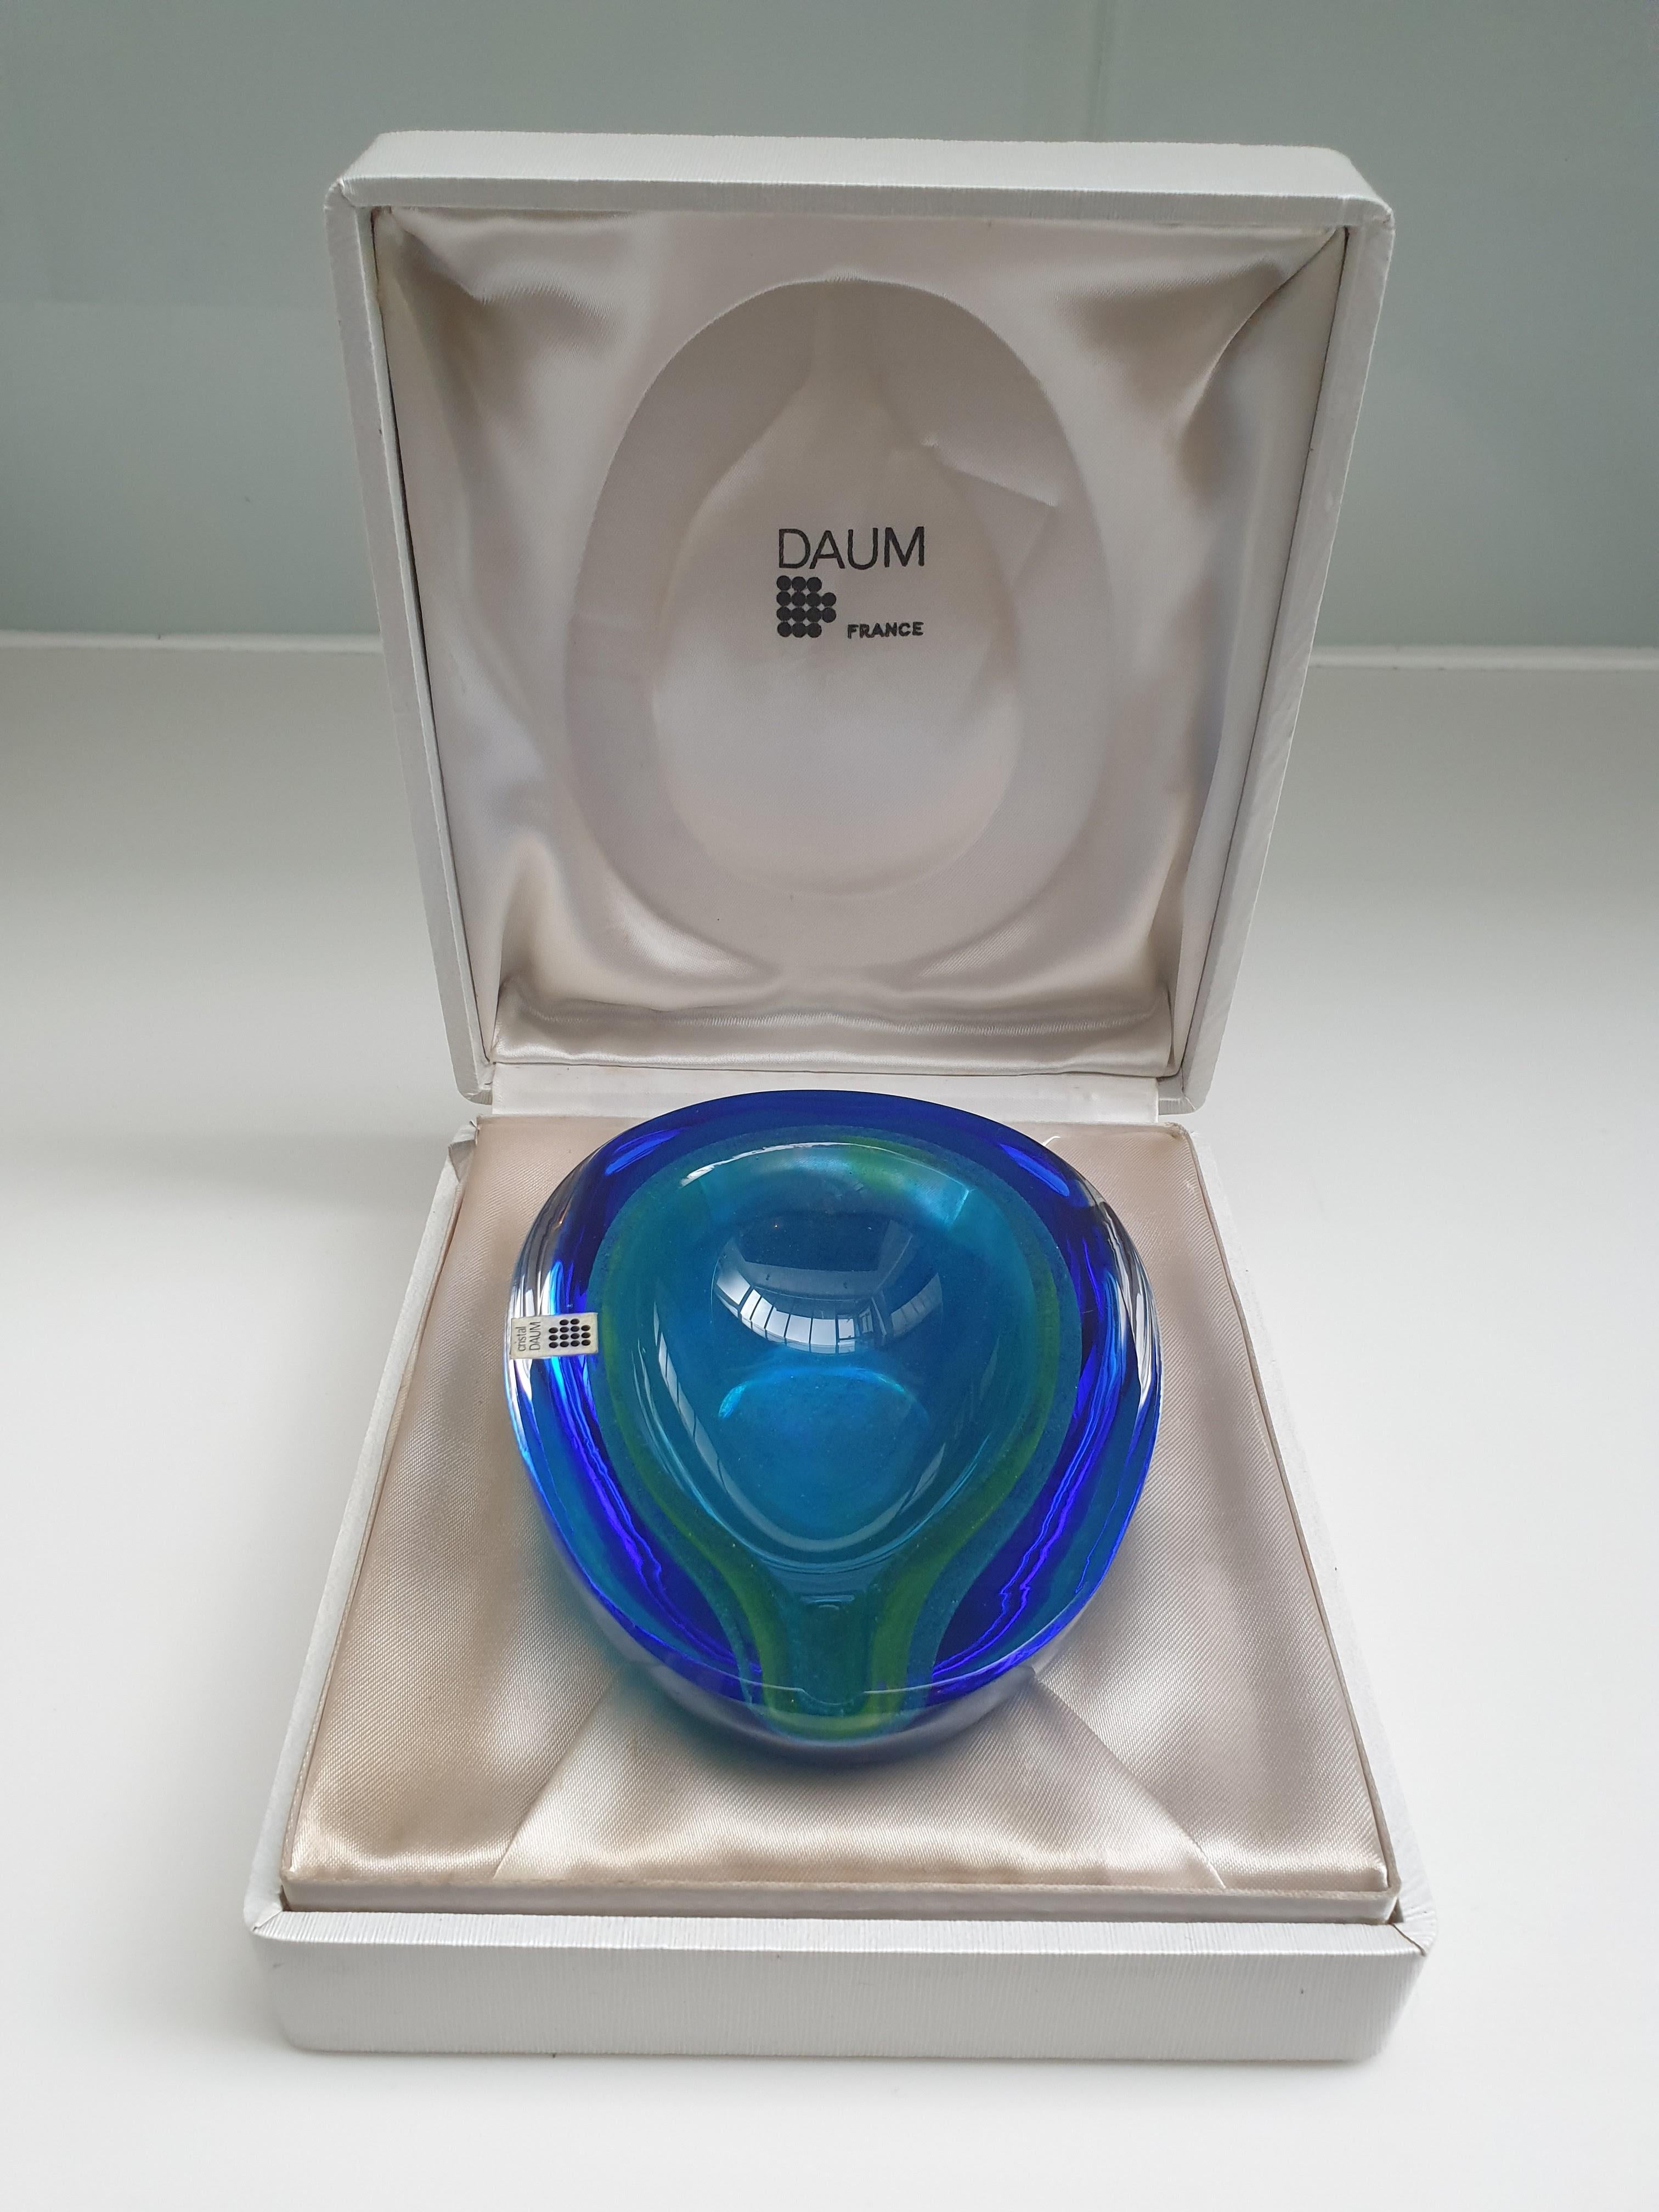 Beautiful luminescent crystal glass dish/ashtray  by Daum France. The blue/green hue is reminiscent of the sea. It is unusual to find such a lovely tone. It comes complete with its Daum sticker and engraved signature to the base. The dish also comes